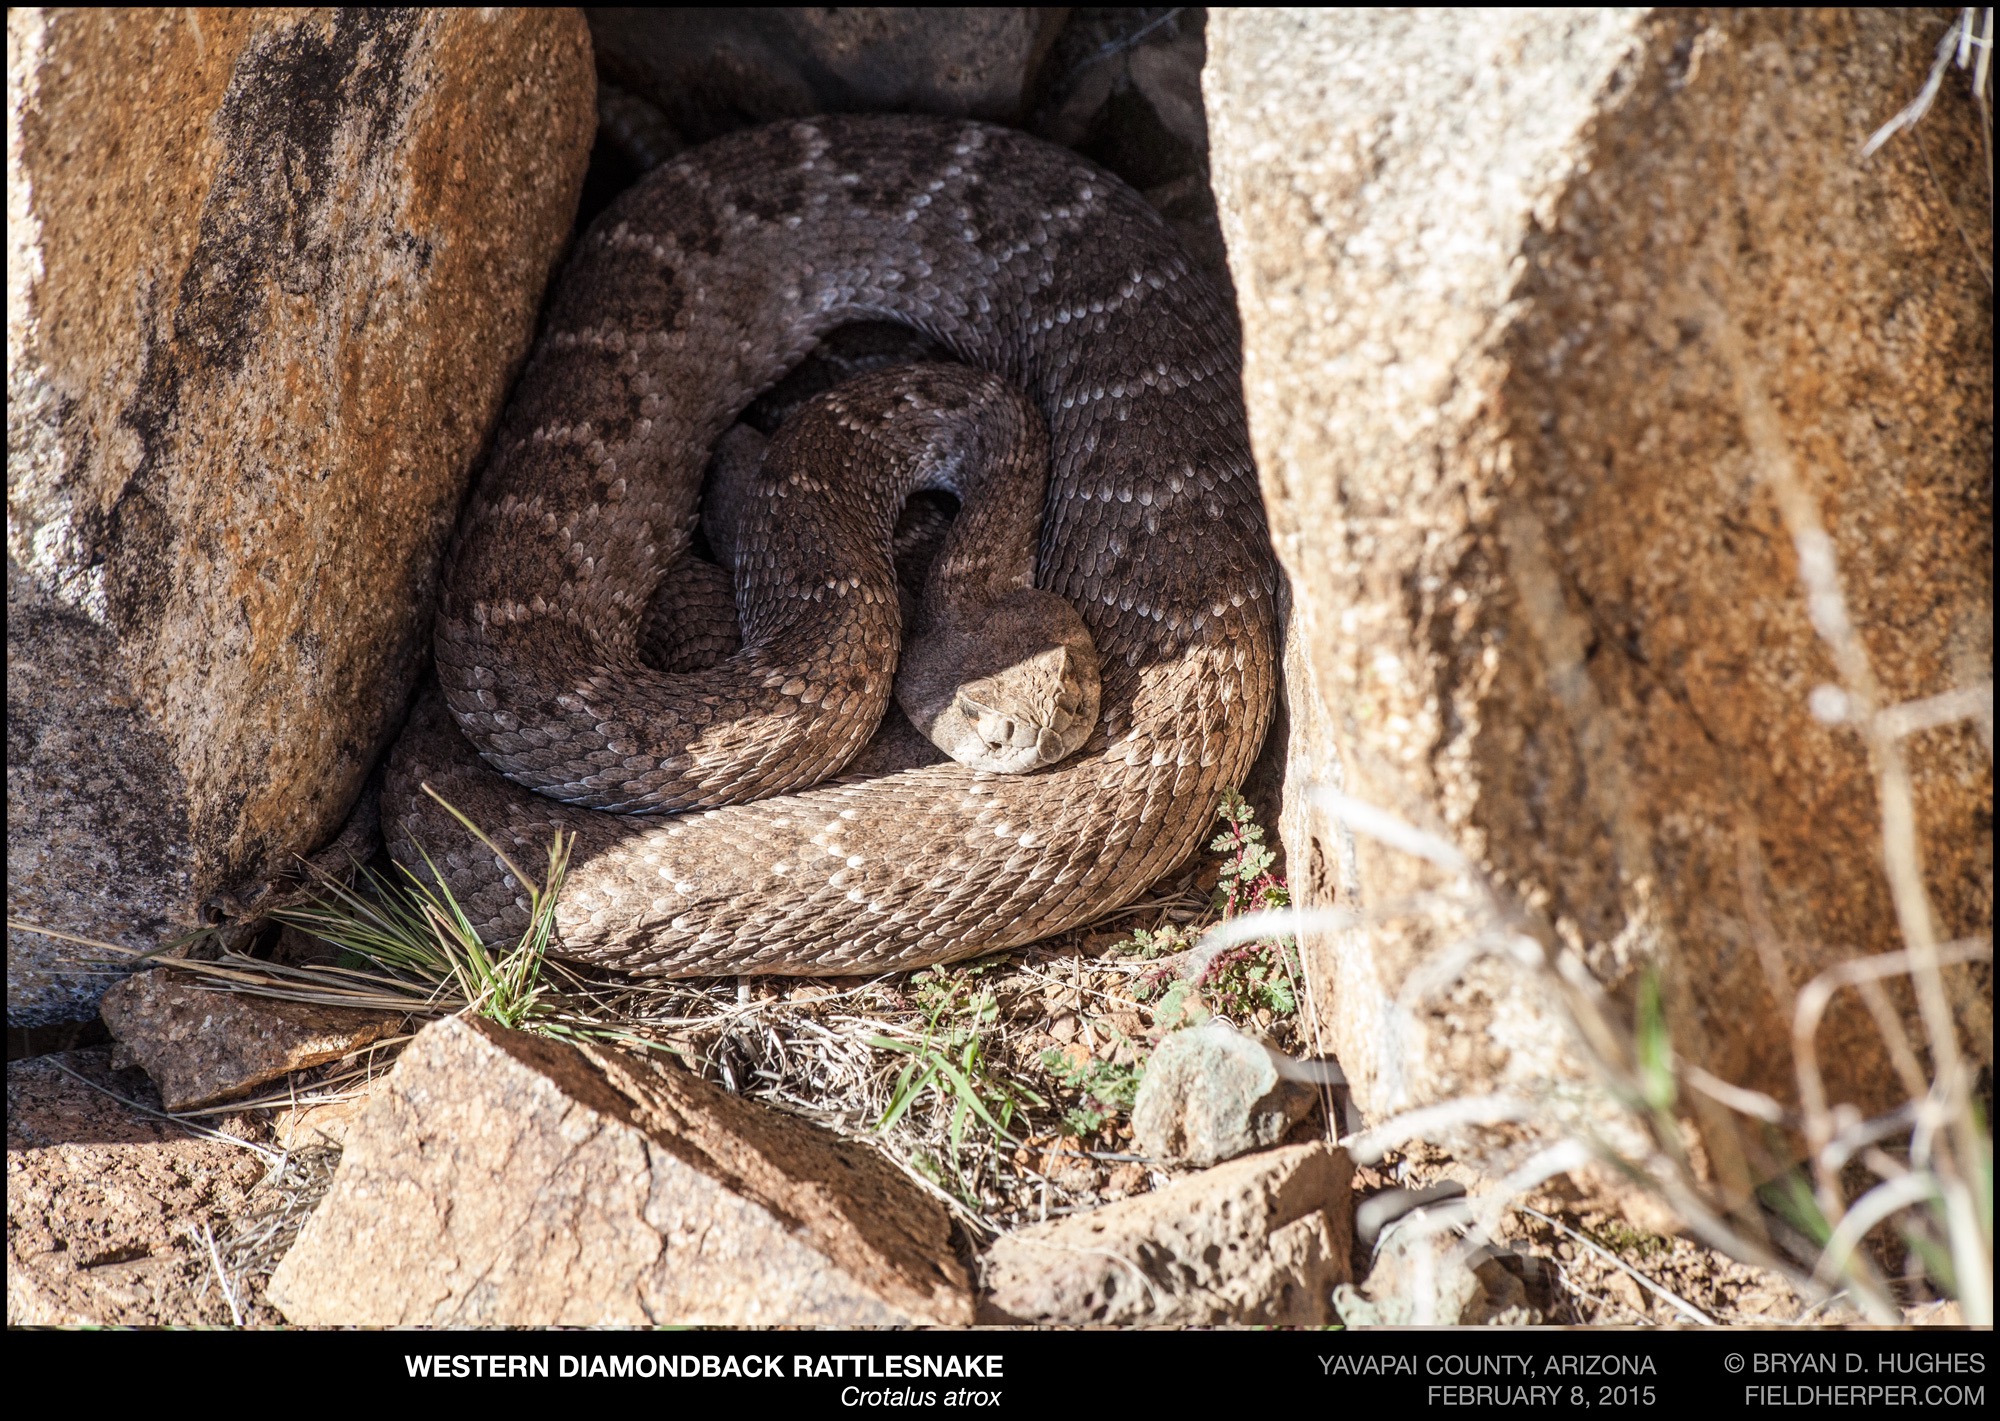 When Do Rattlesnakes Come Out of Hibernation?